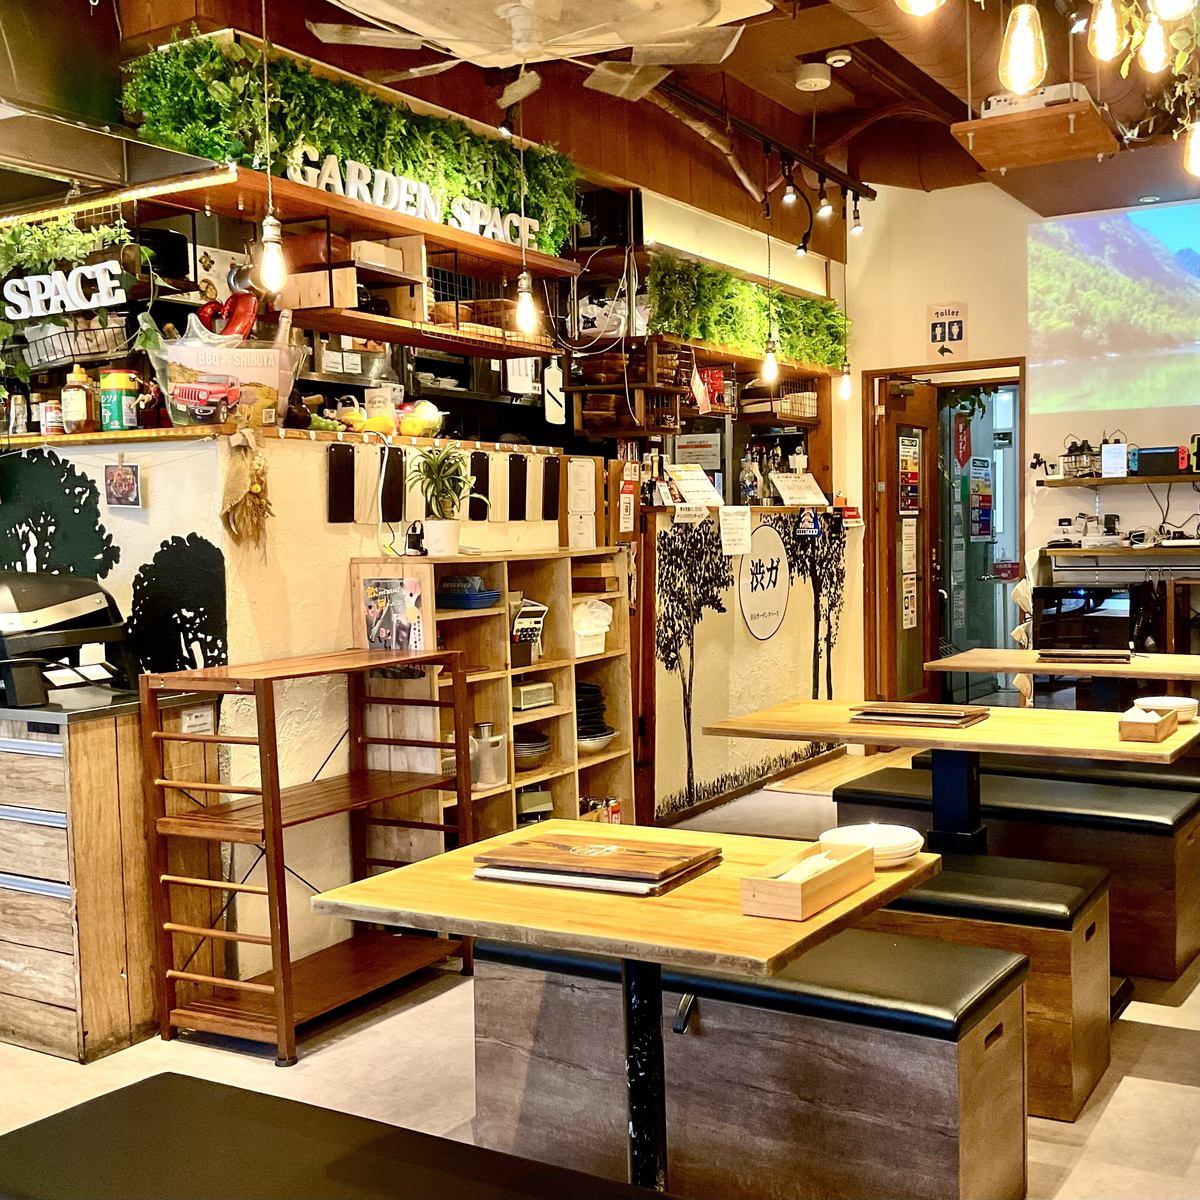 A stylish garden-style izakaya located 2 minutes walk from Shibuya Station that takes advantage of the greenery♪ Can be reserved for private parties of 15 to 40 people! We can also accommodate larger groups at our affiliated restaurants!